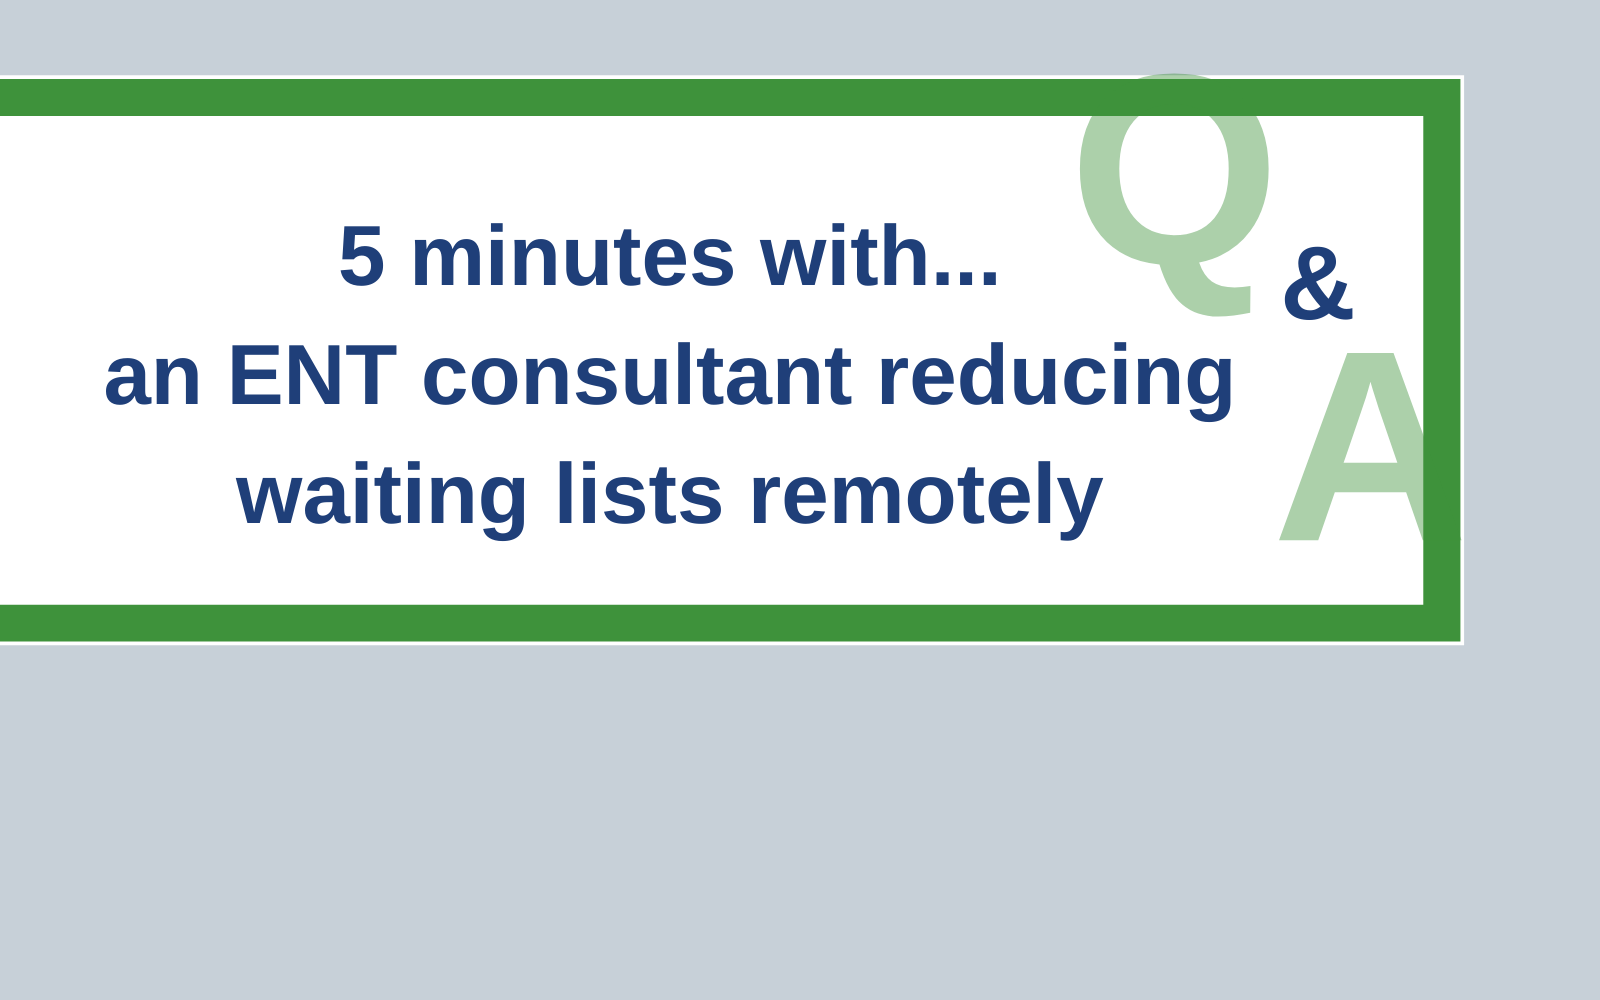 5 minutes with an ENT consultant reducing waiting lists remotely - Consultant Connect